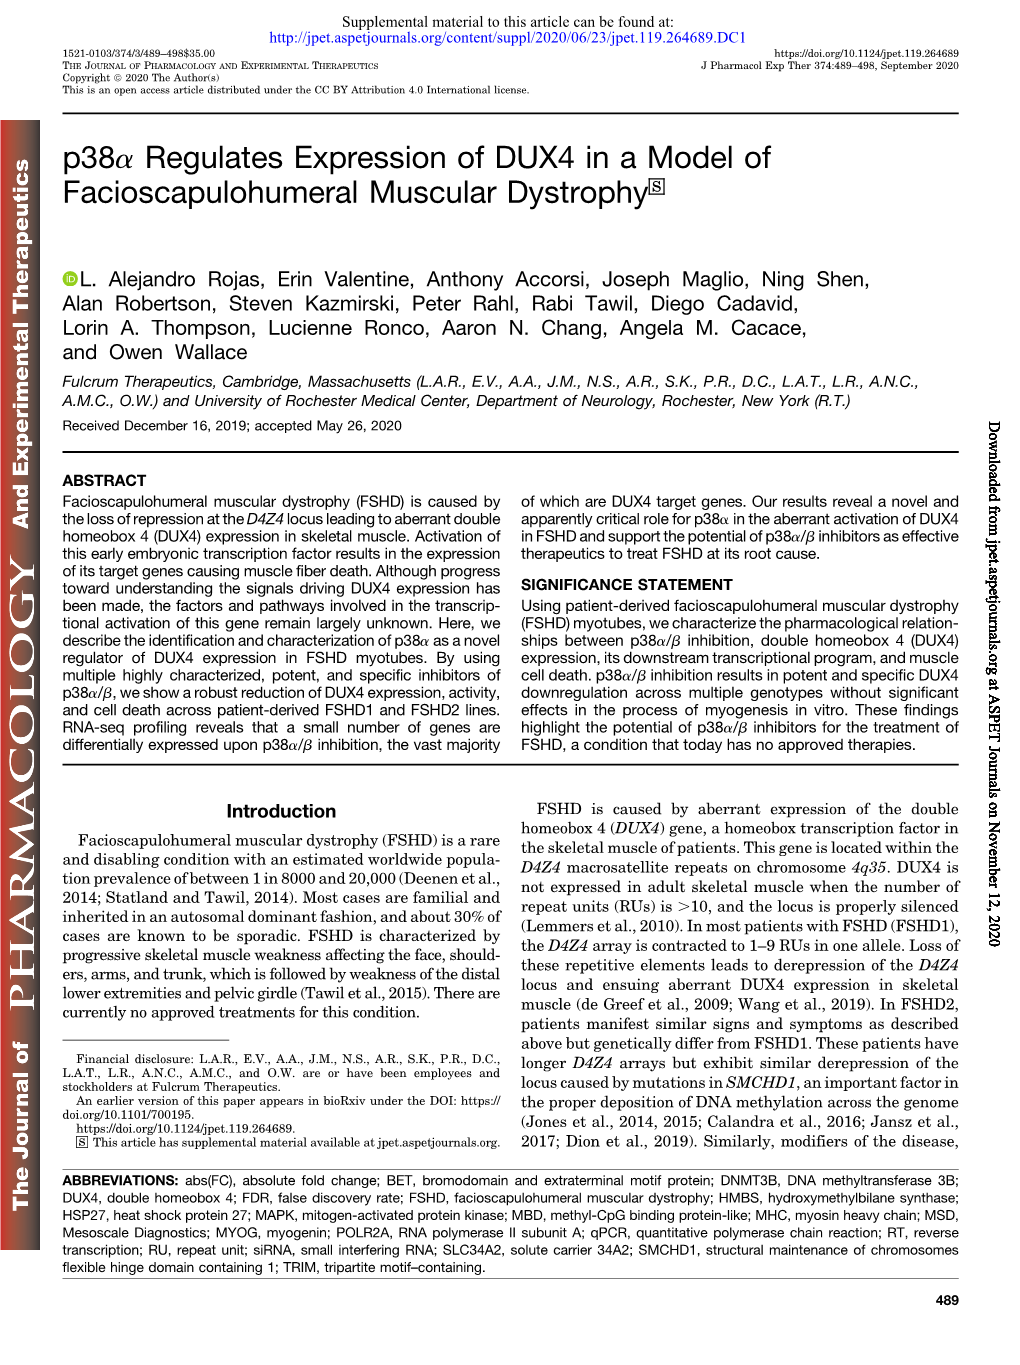 P38a Regulates Expression of DUX4 in a Model of Facioscapulohumeral Muscular Dystrophy S